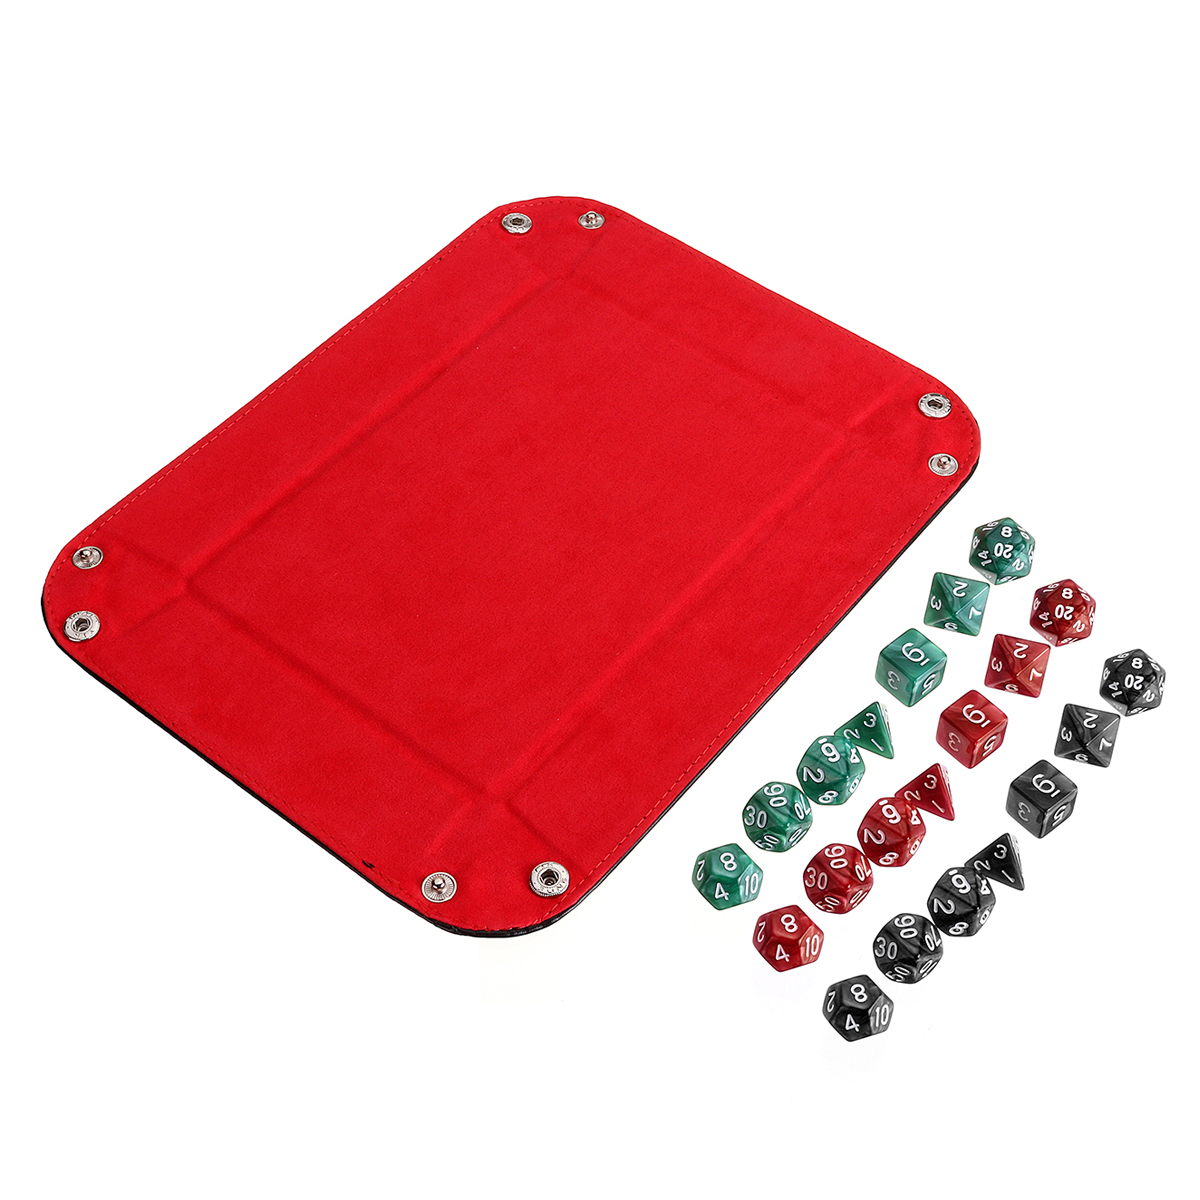 Multisided-Dice-Holder-Polyhedral-Dices-PU-Leather-Folding-Rectangle-Tray-for-RPG-1372549-2